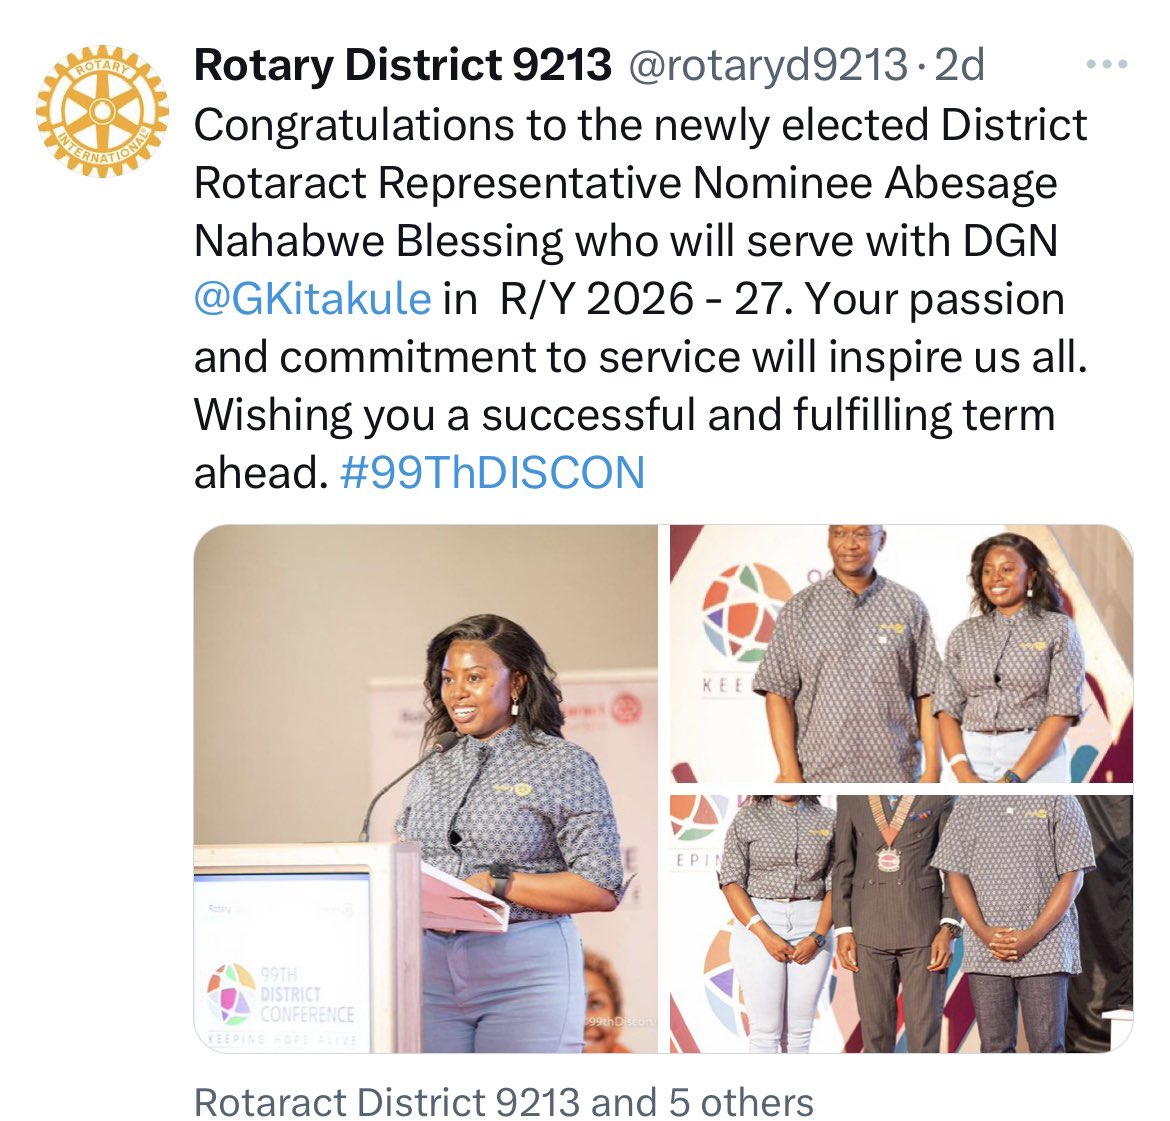 On Saturday, 20th April 2024, I was announced as the DRRN for Rotary international District 9213, @RotactD9213 , I am very humbled to see that fellow service men and women entrusted me with this leadership role, I pledge my best as we continue to serve communities. 🤝